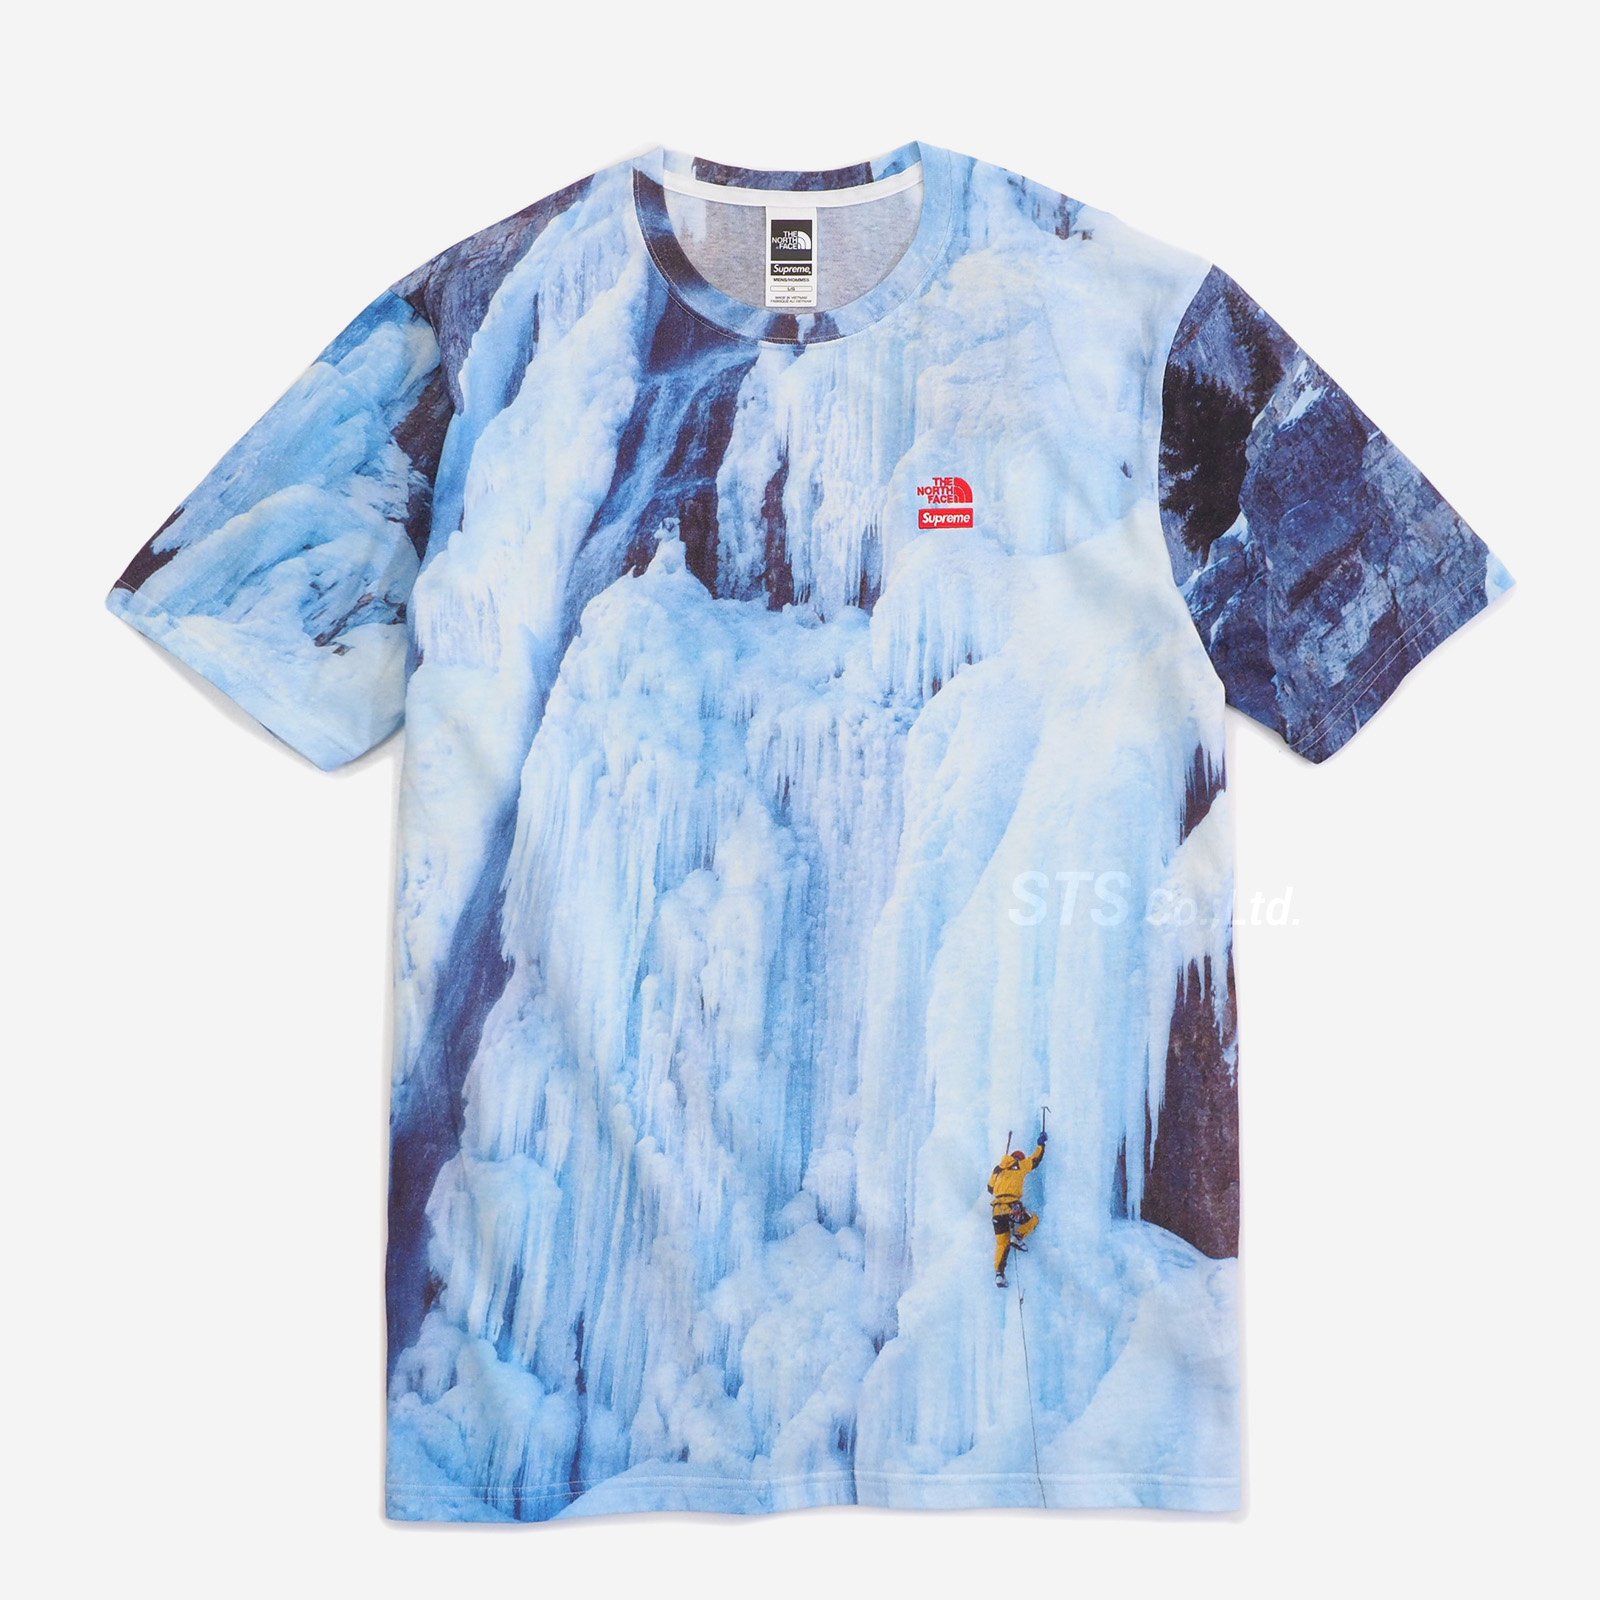 Supreme/The North Face Ice Climb Tee - ParkSIDER